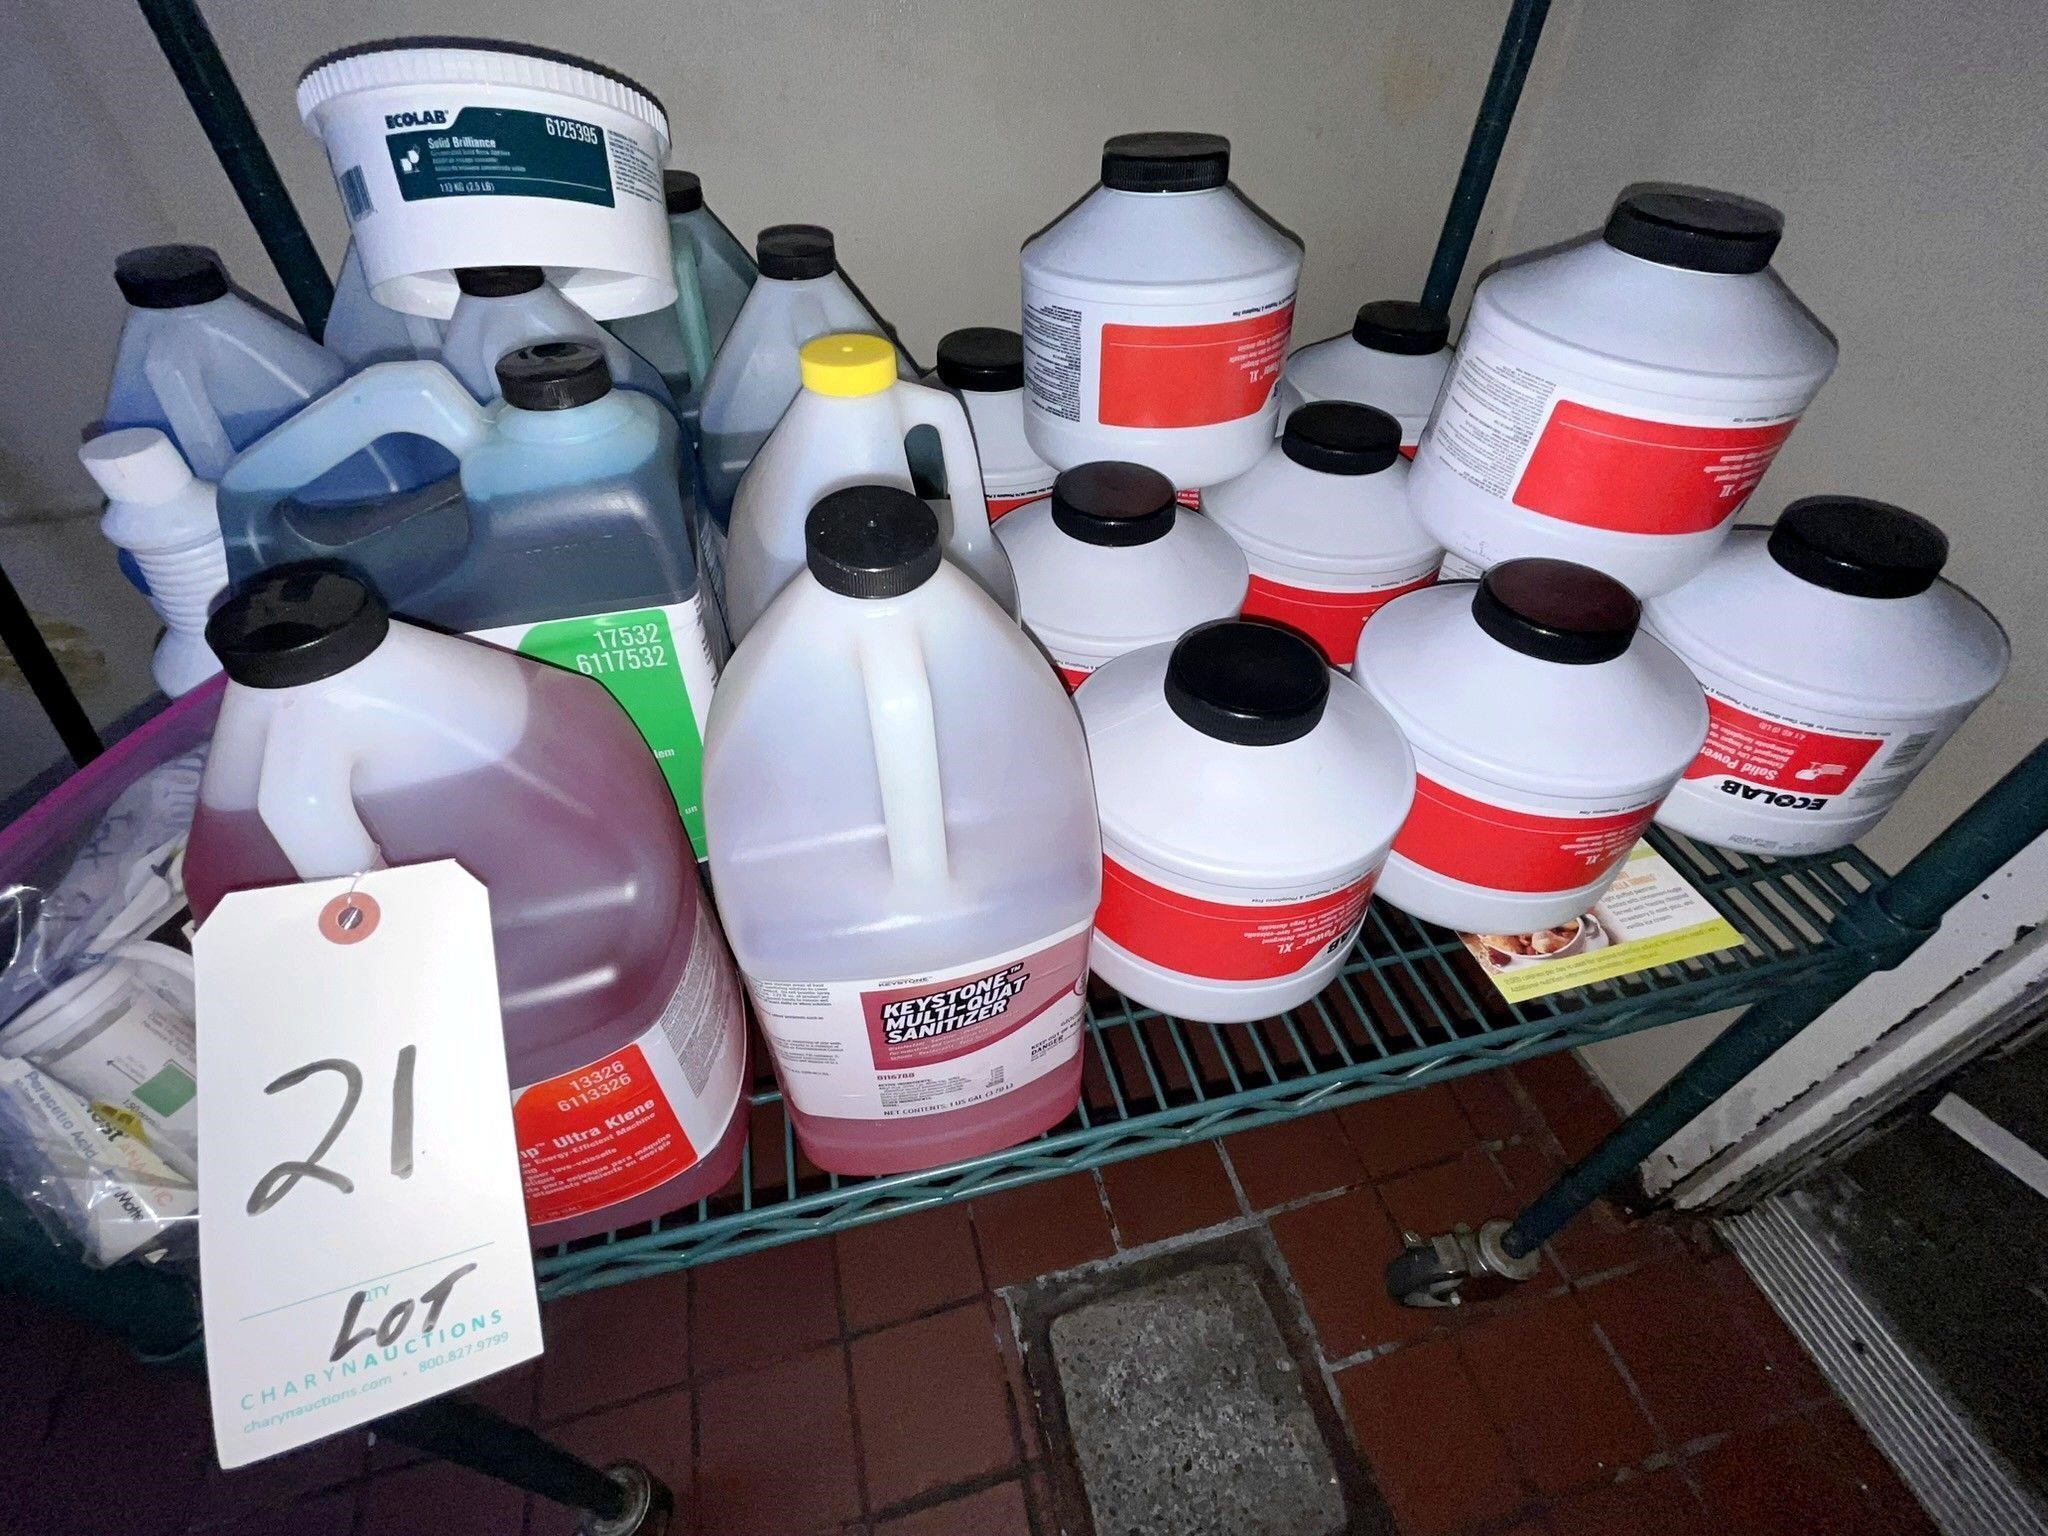 *LOT*ASST CLEANING CHEMICALS